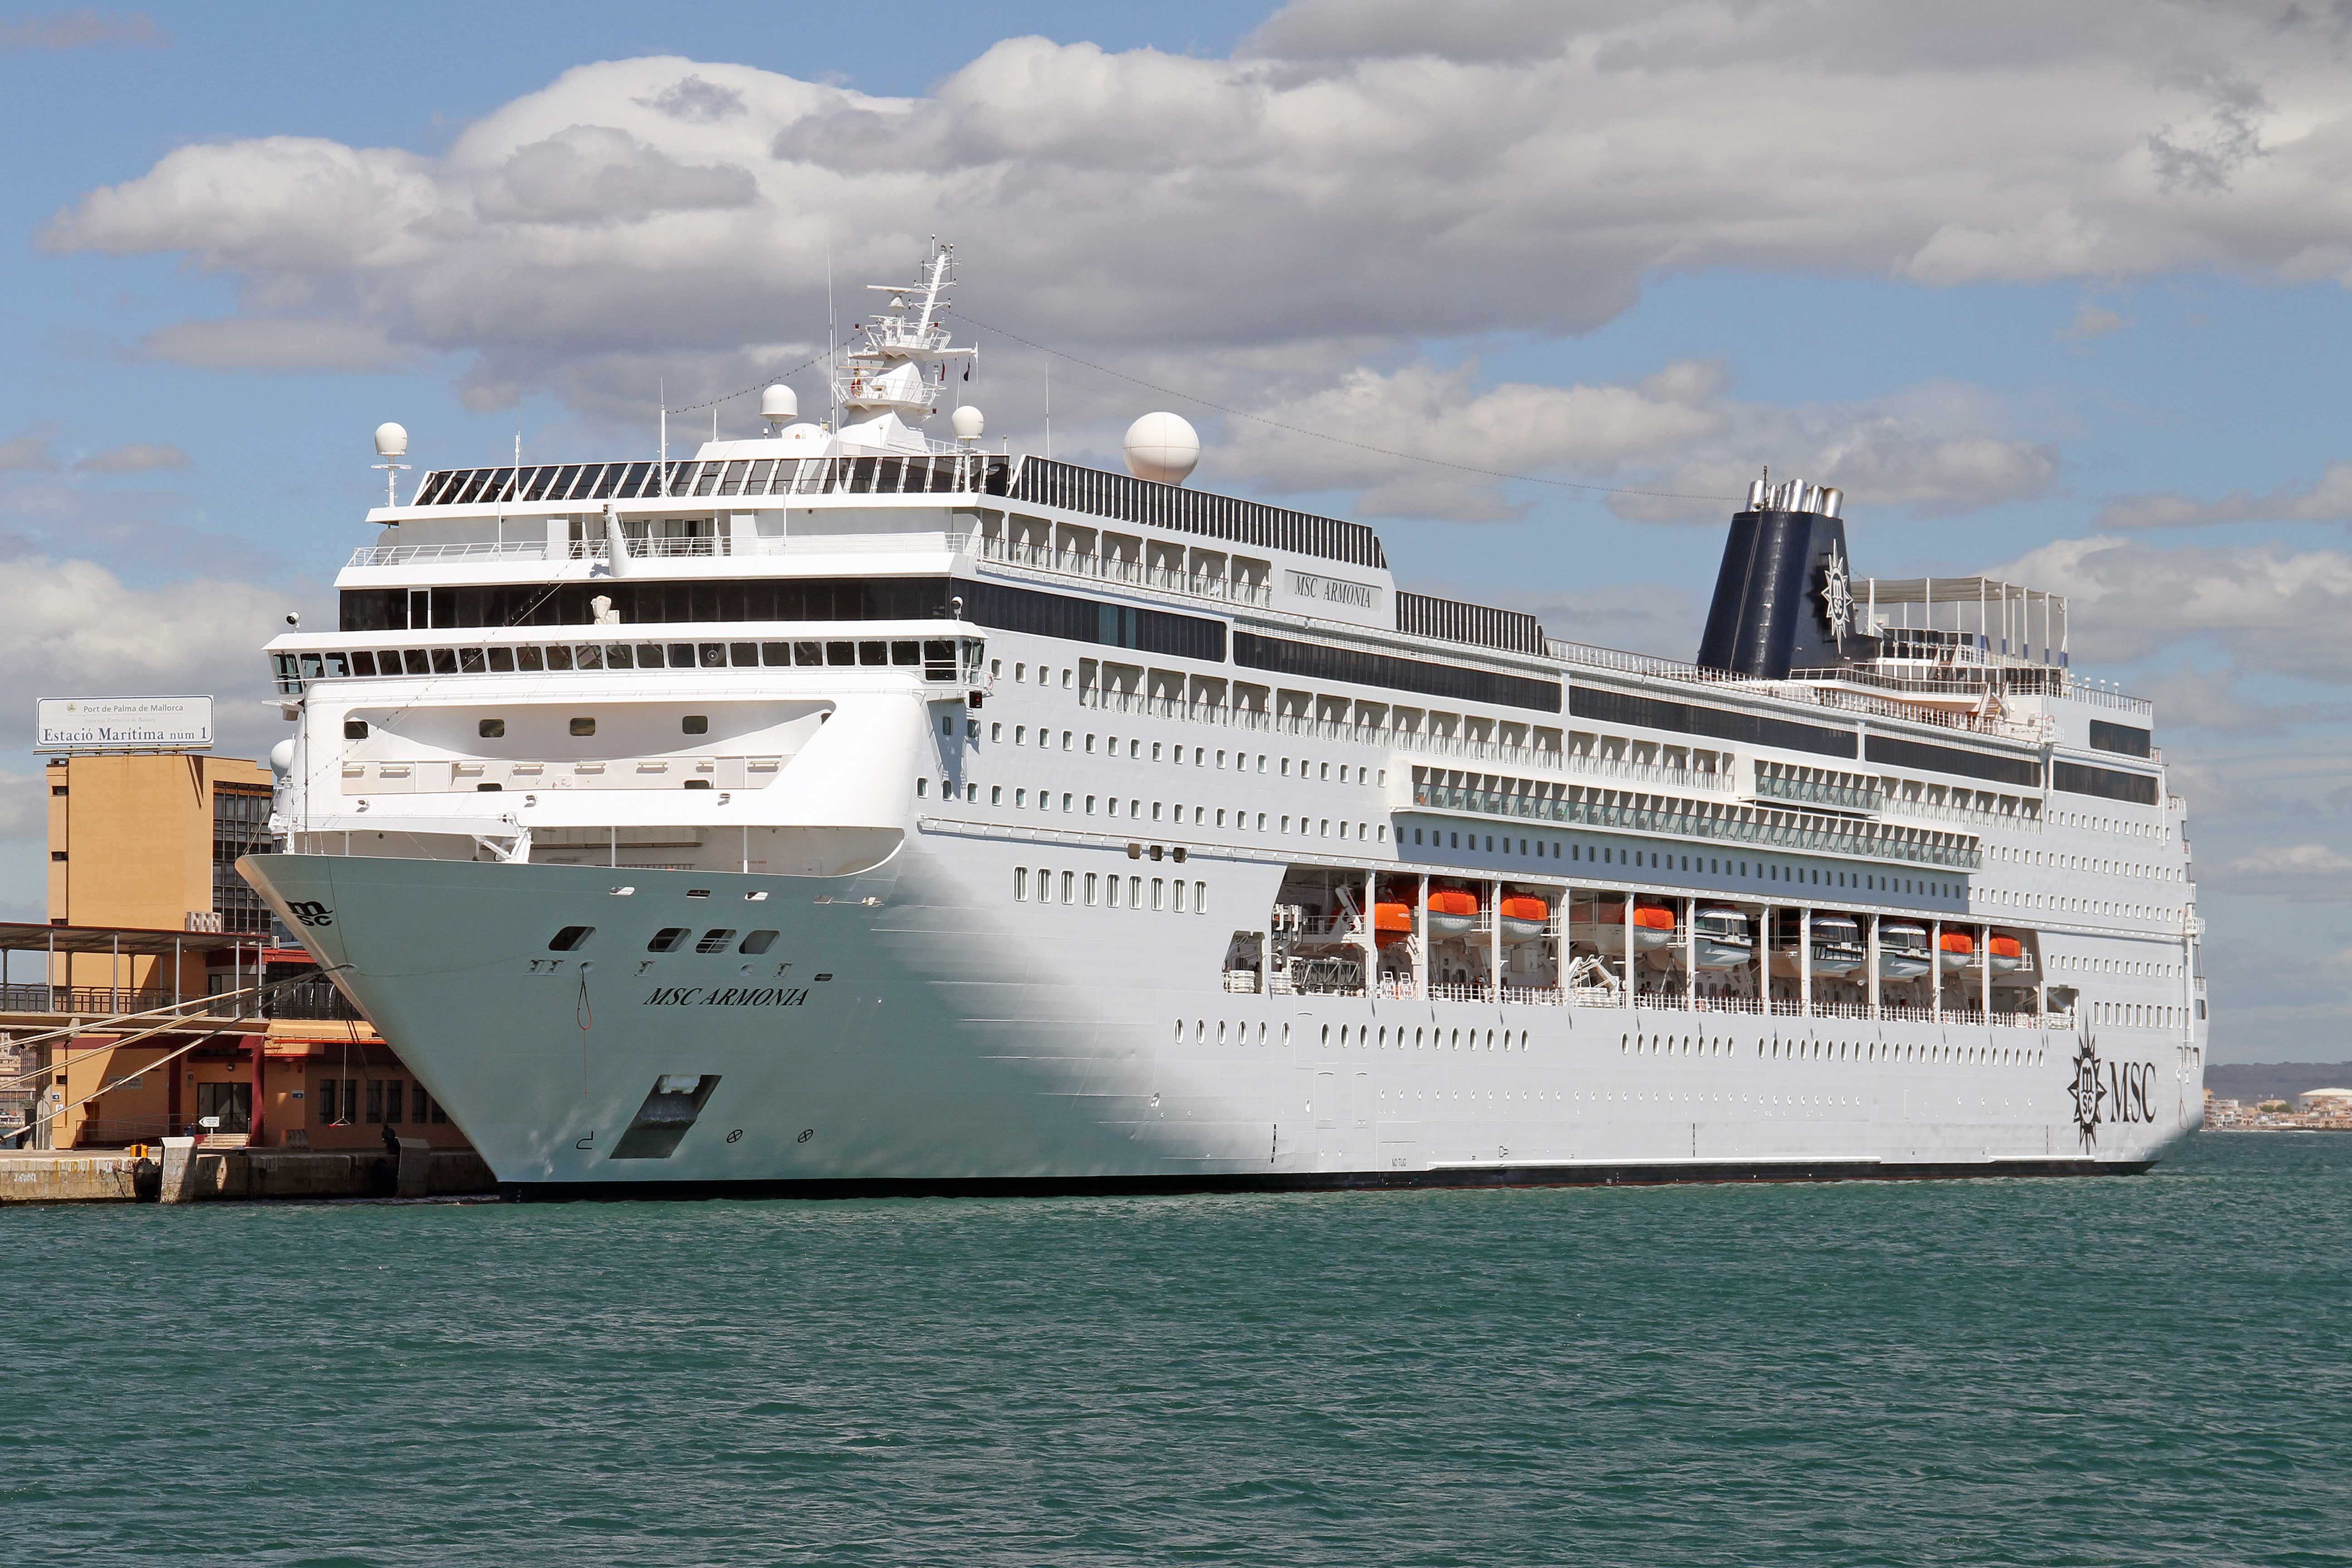 The largest cruise ship to date will arrive at Maó's Port in April